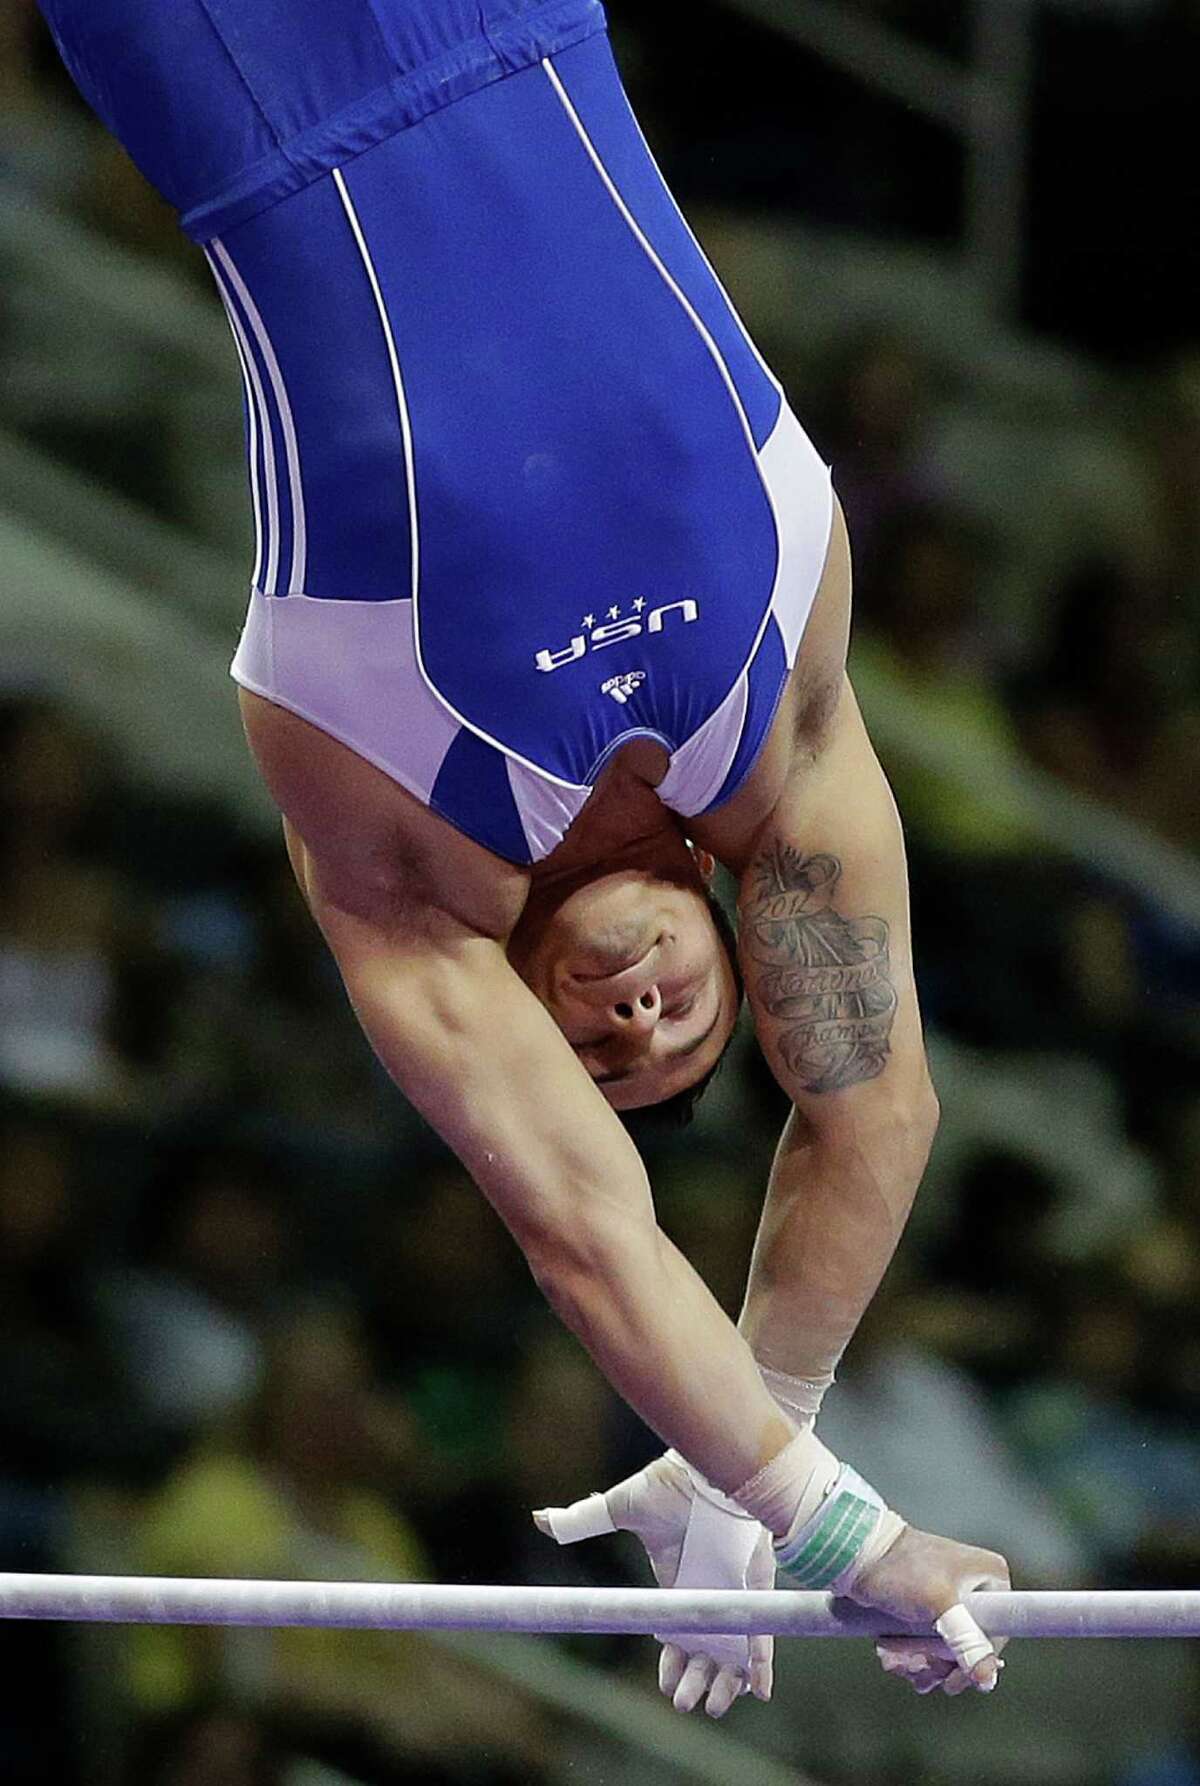 Sam Mikulak competes on the horizontal bar during the preliminary round of the men's Olympic gymnastics trials Thursday, June 28, 2012, in San Jose, Calif. (AP Photo/Jae C. Hong)